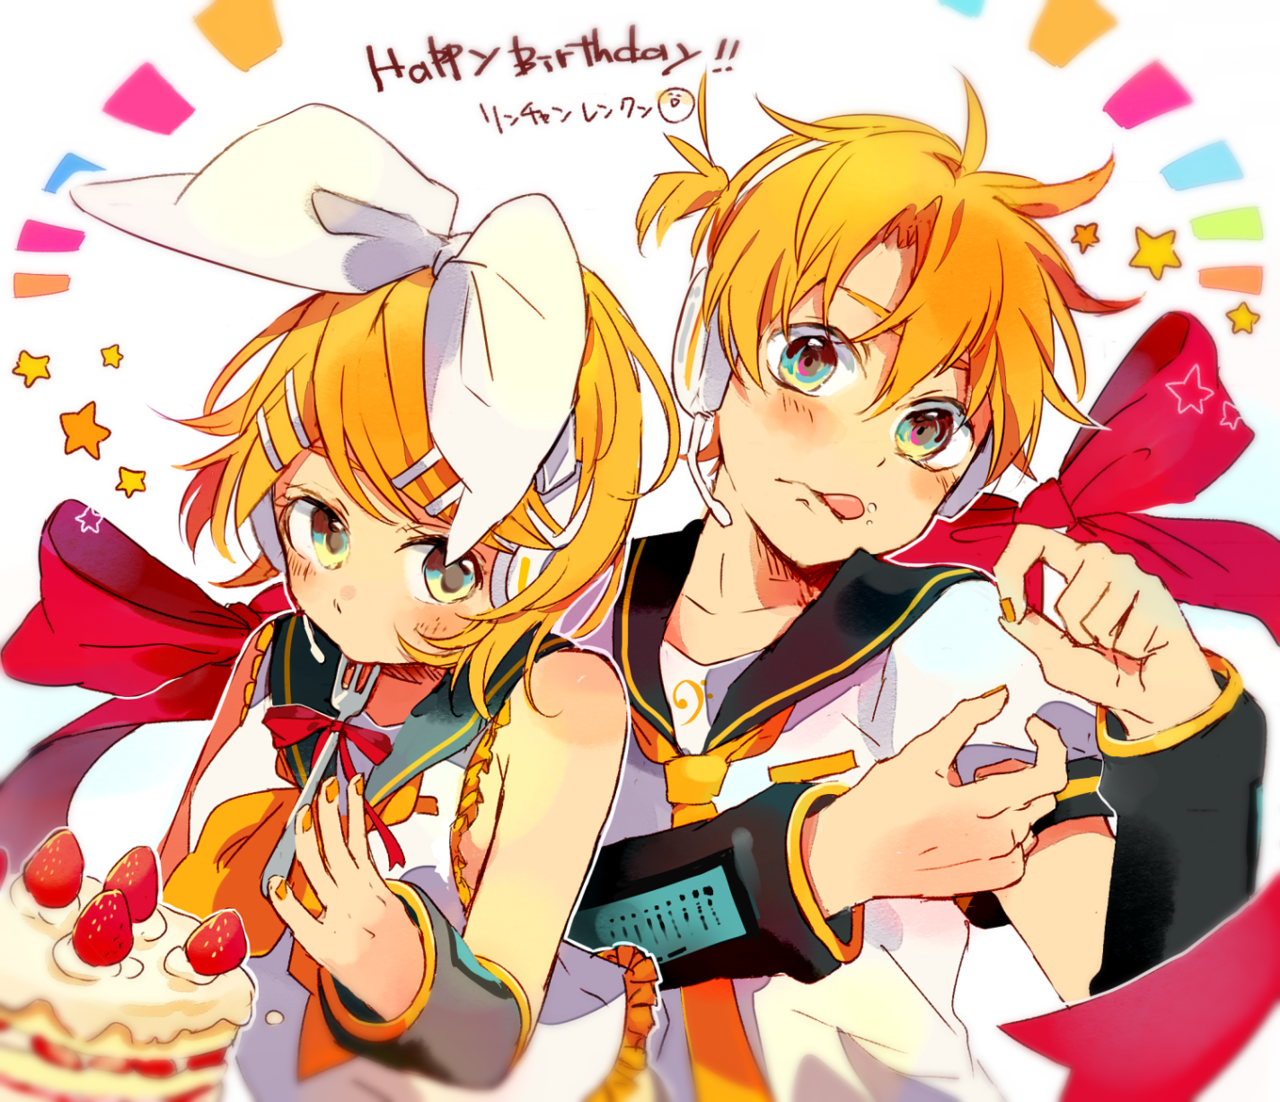 image about Anime Birthday picture